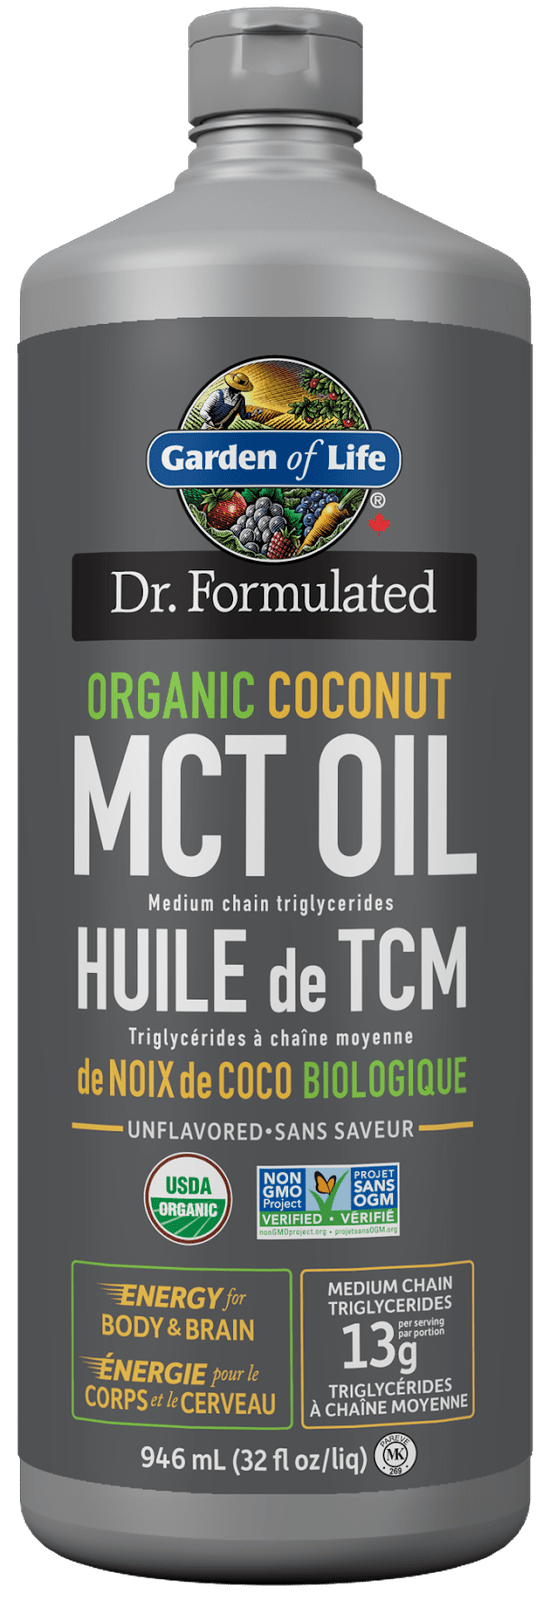 Garden of Life Dr. Formulated Organic Coconut MCT Oil Image 2